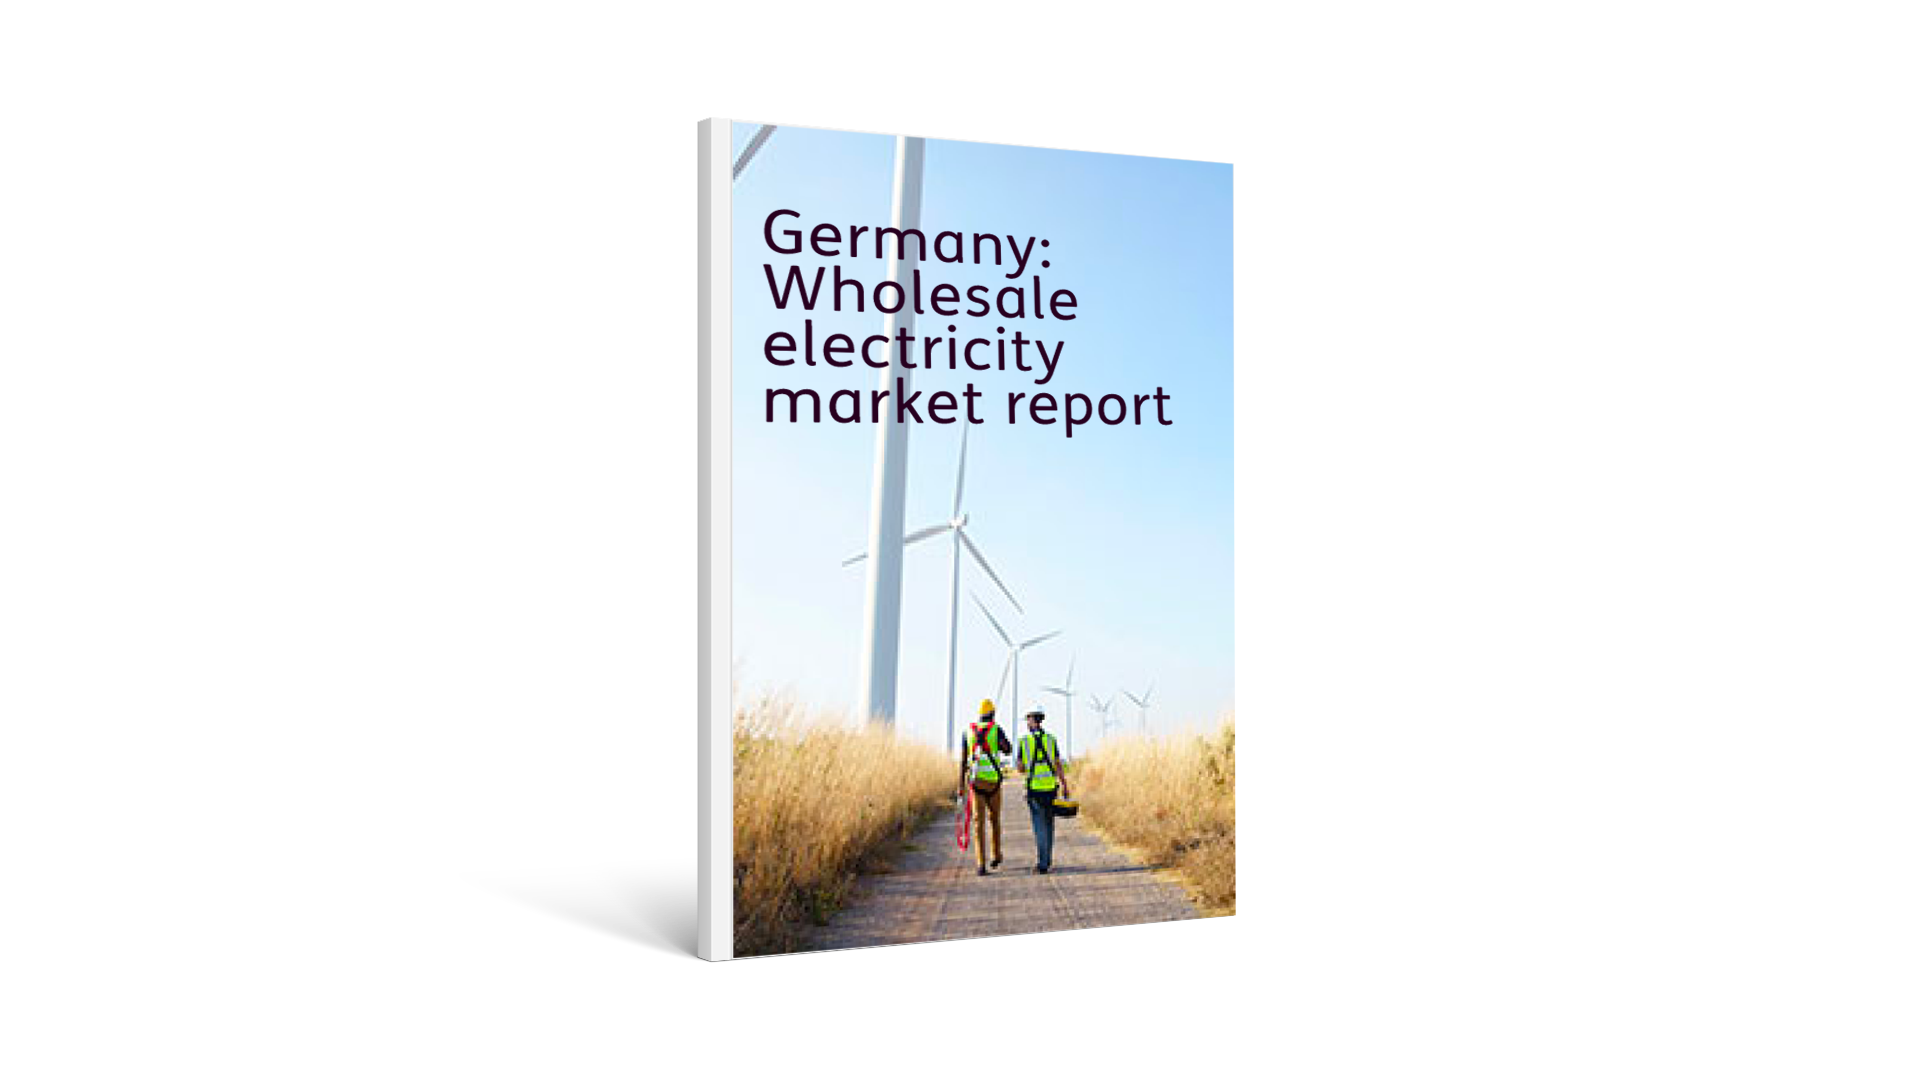 Germany: Wholesale electricity market report